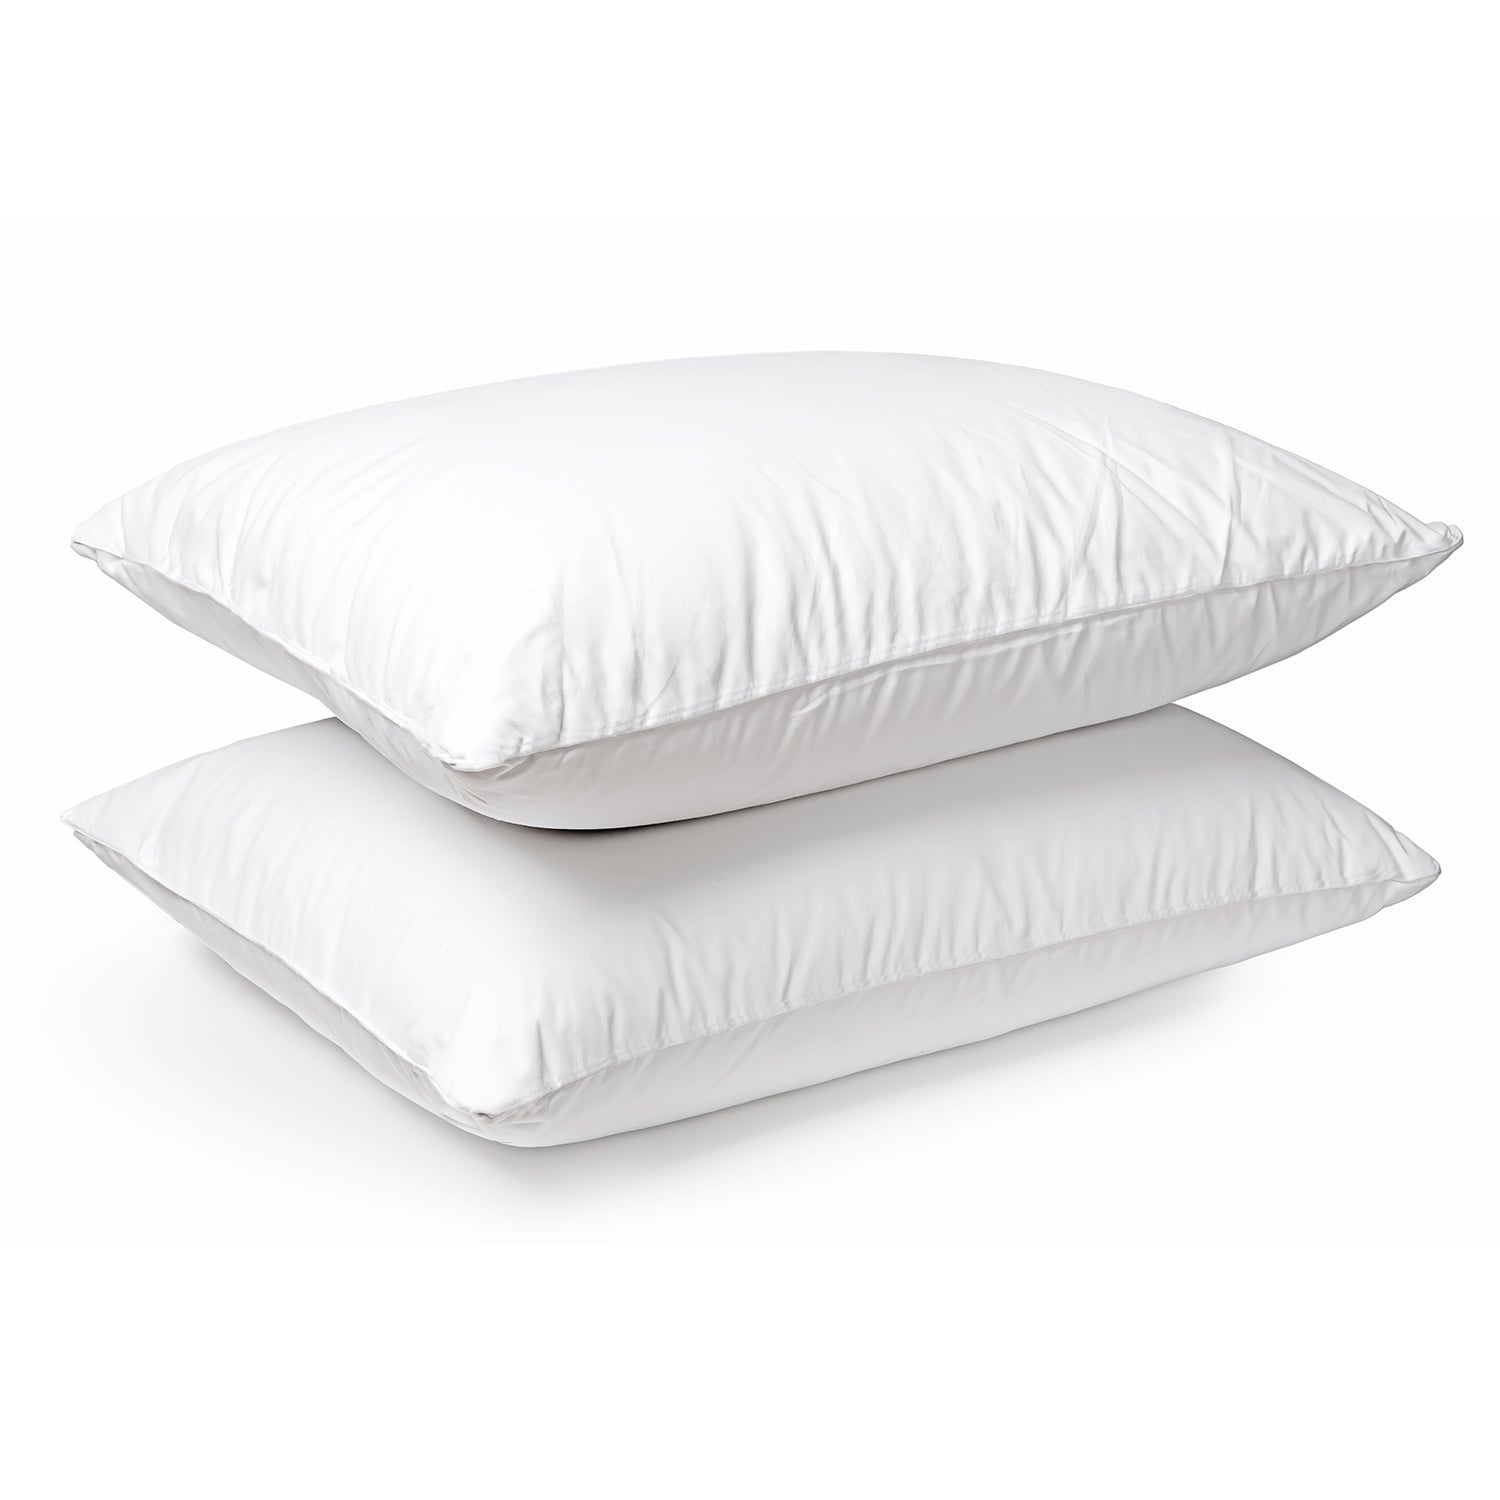 Home Fashion Cotton Cover Firm Standard Pillows